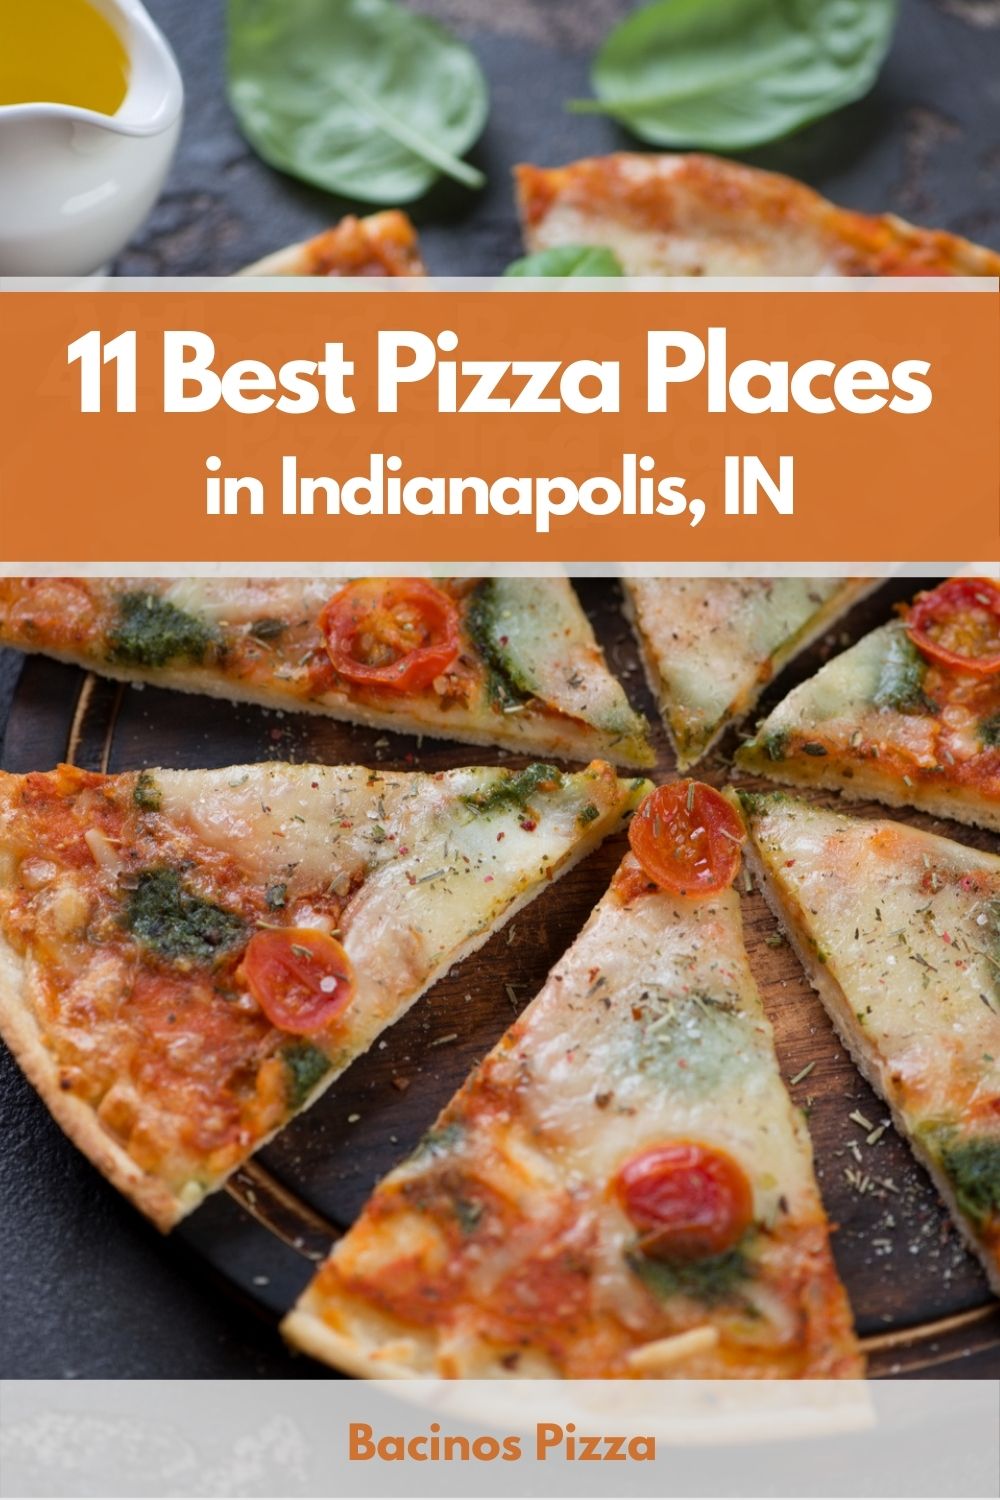 11 Best Pizza Places in Indianapolis, IN pin 2